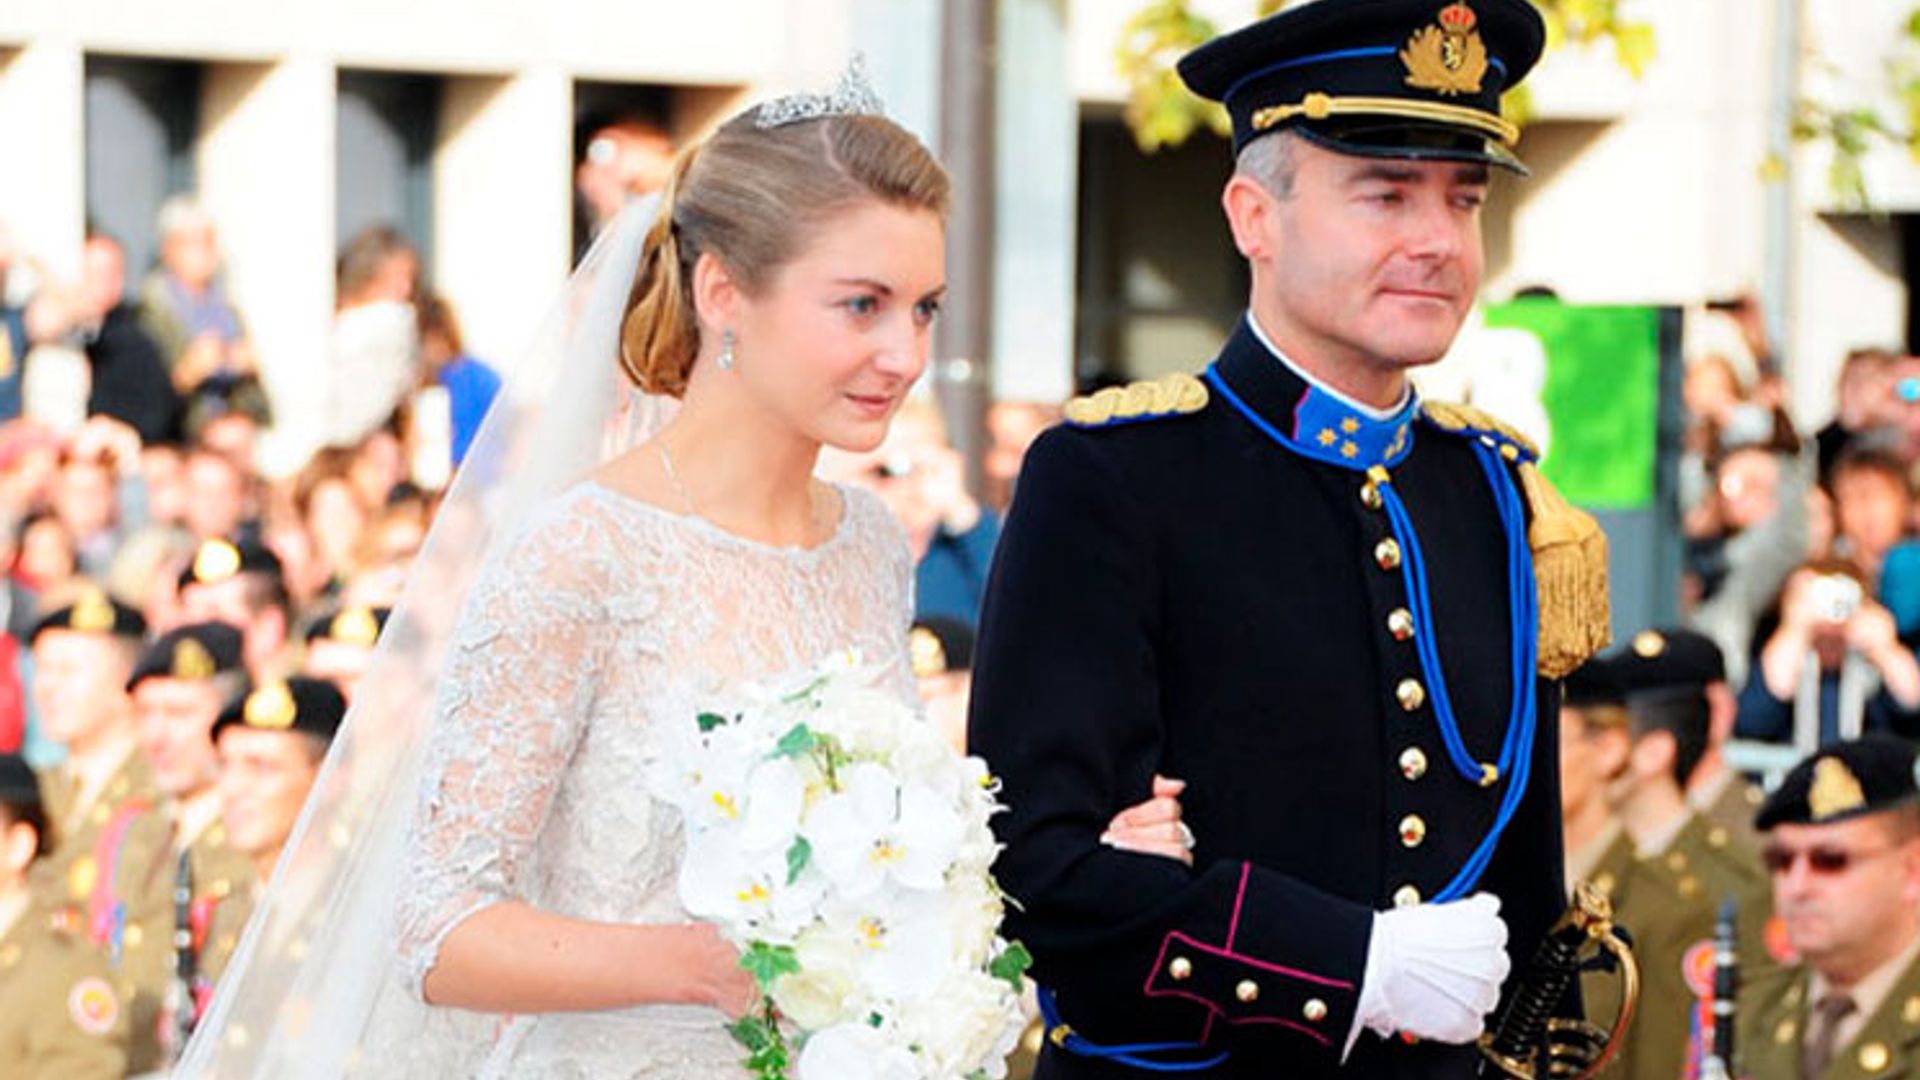 Guillaume and Stephanie wed in a glorious ceremony full of pomp and grandeur